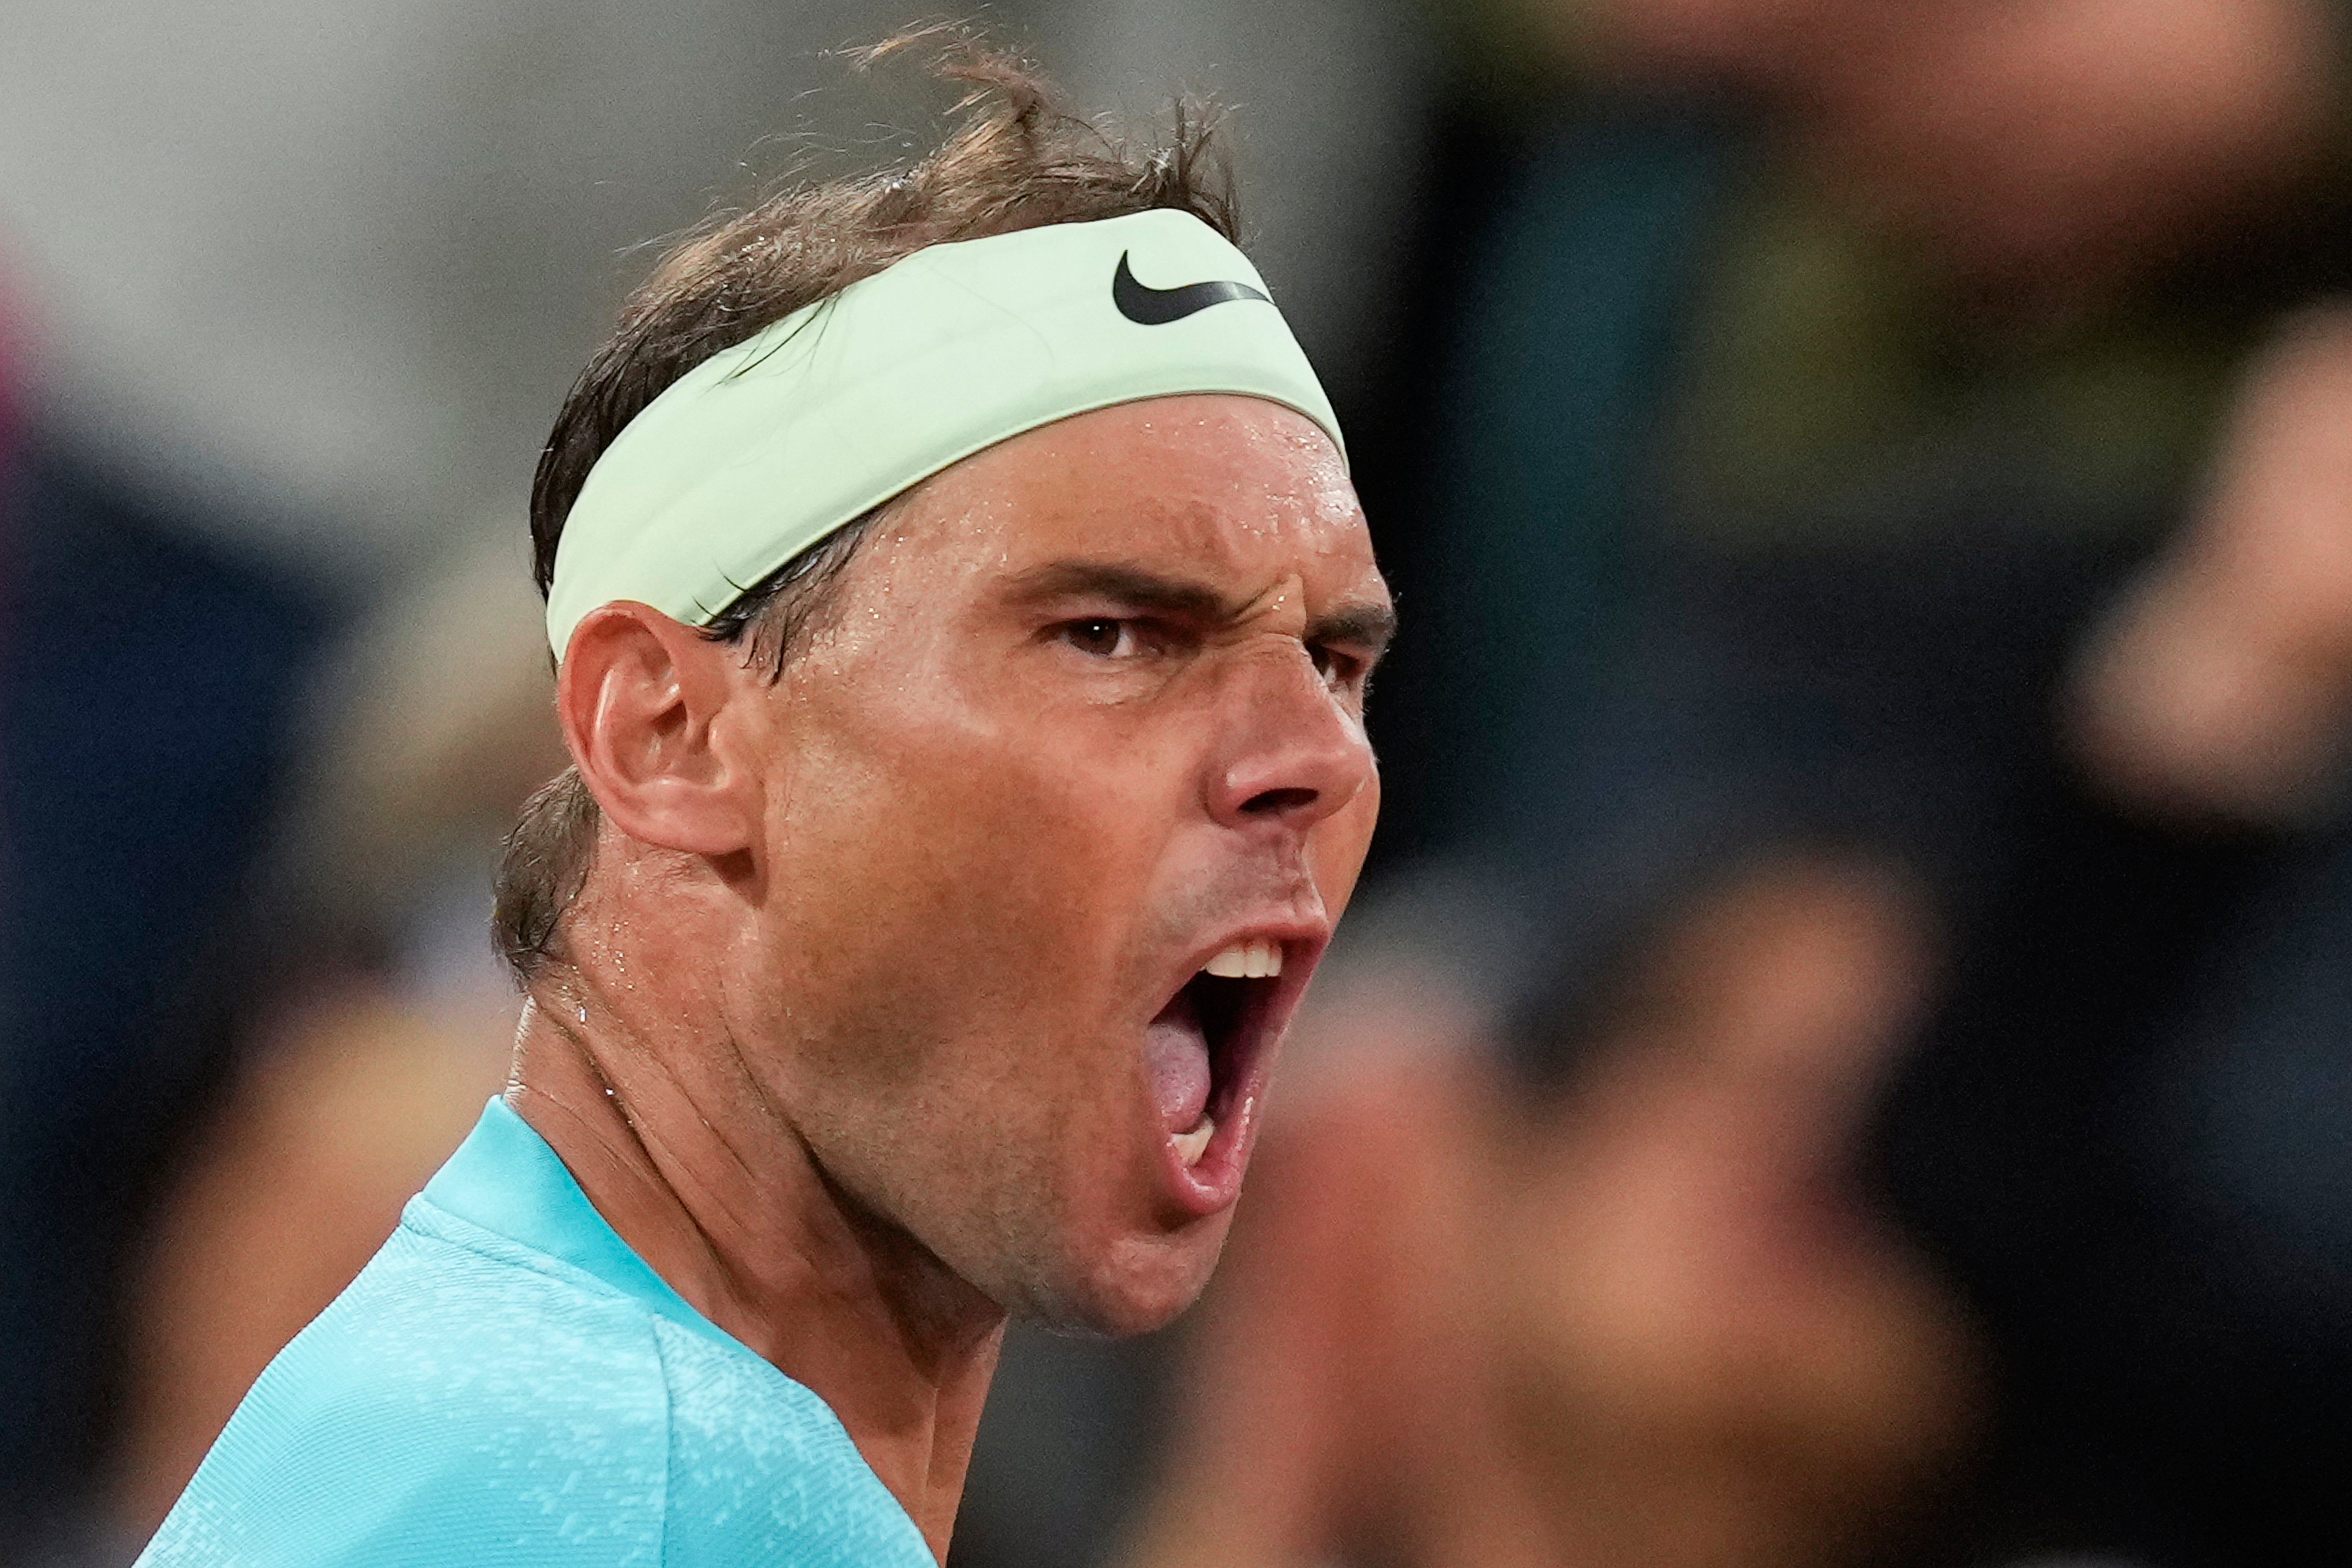 Rafael Nadal is seeking a fairytale ending to his playing career, on his favourite court